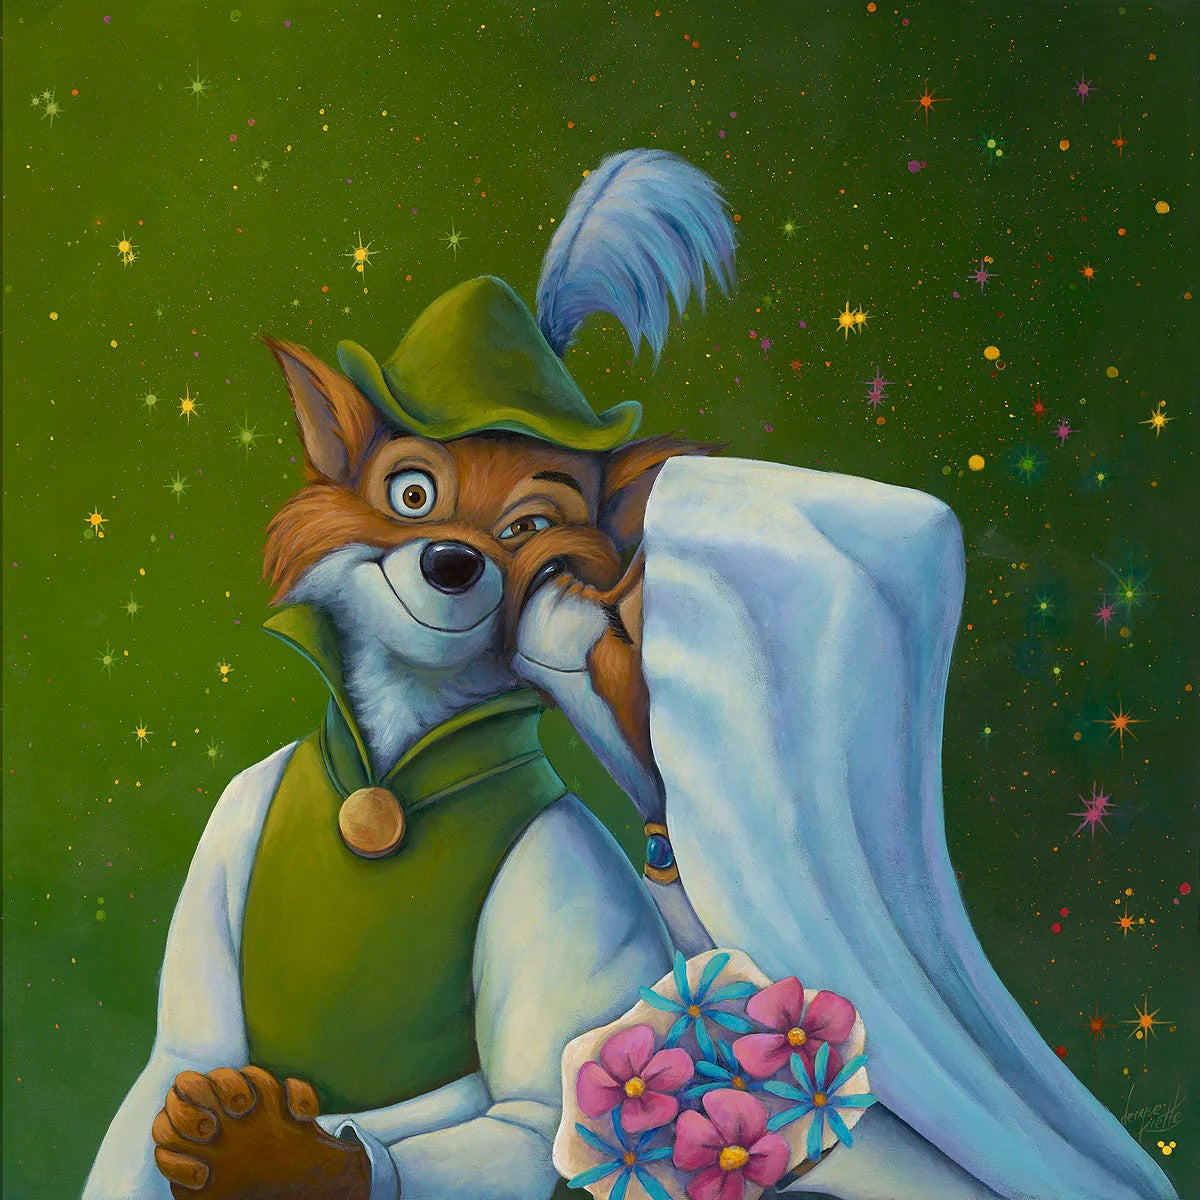 Oo-De-Lally Kiss by Denyse Klette featuring Robin Hood and Maid Marian